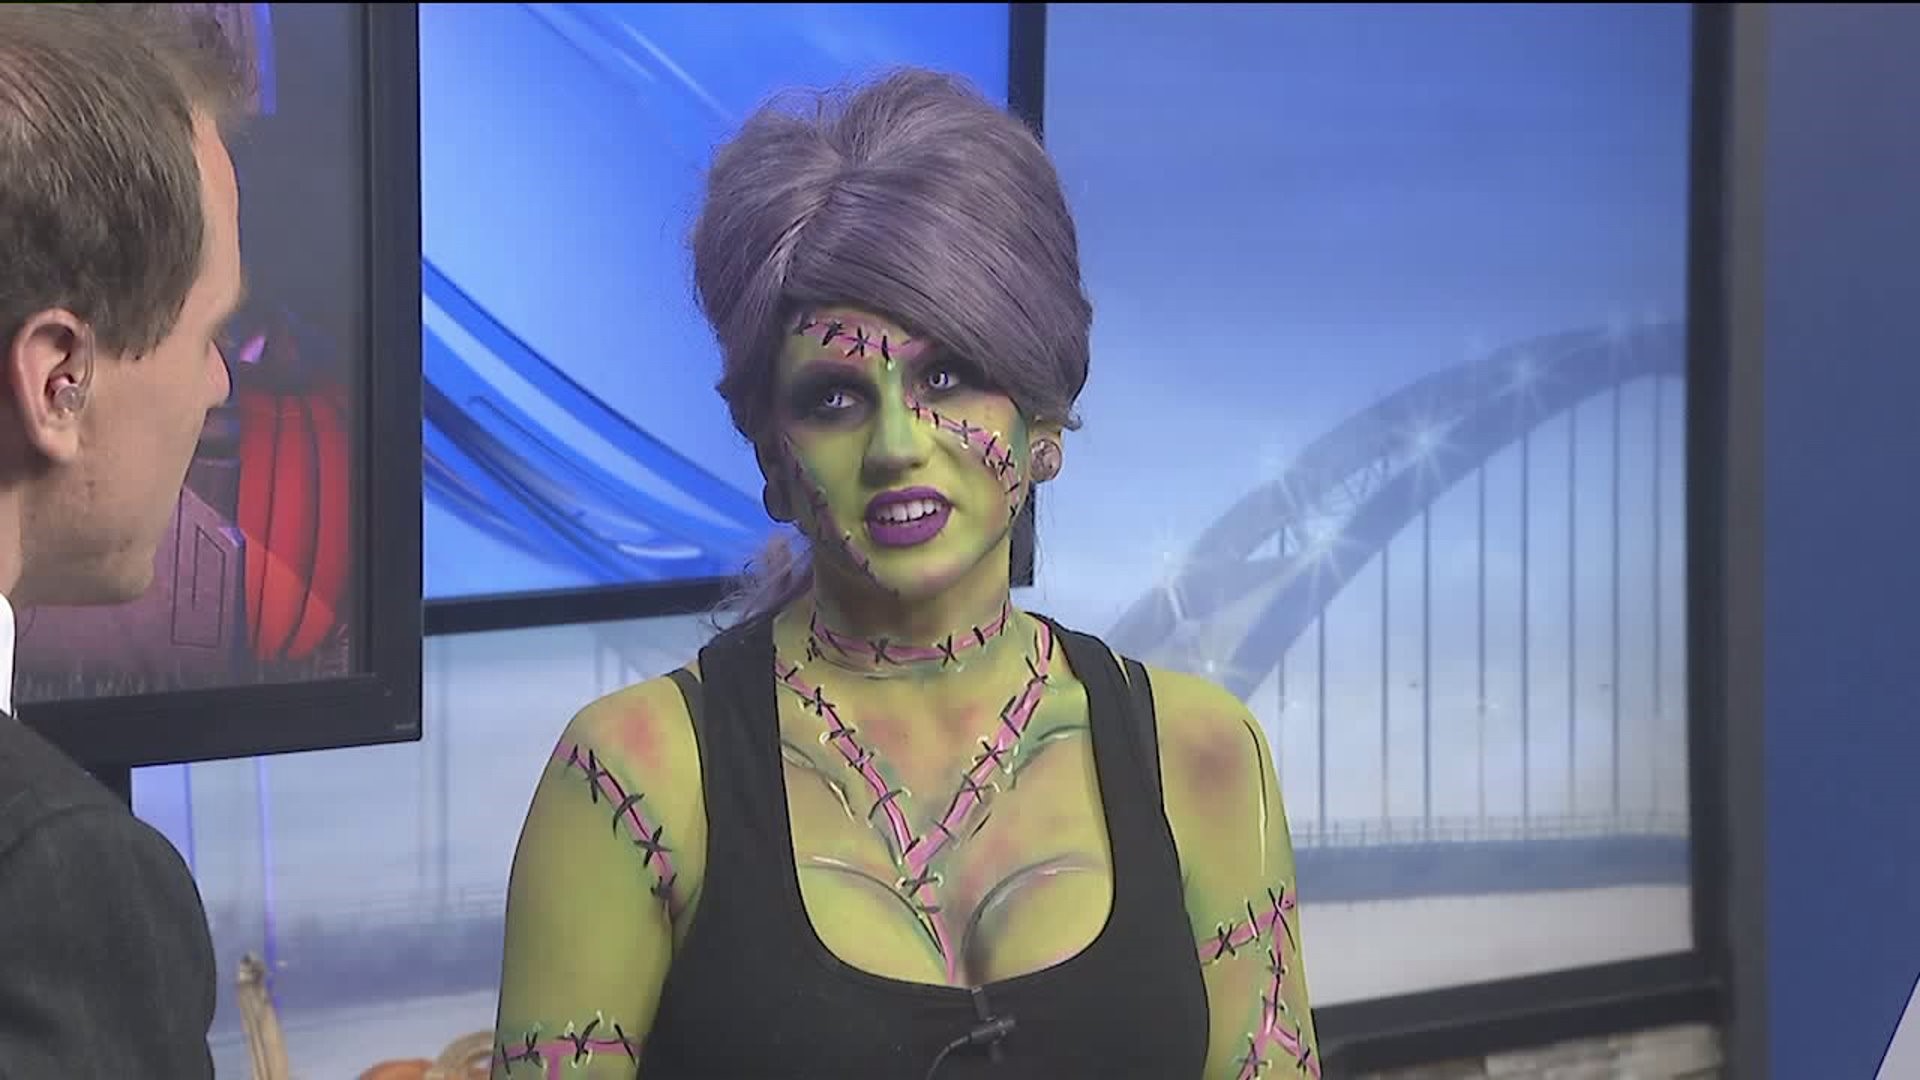 Day 1 of Hallo-Week and Part 2 of Body Painter Corie Willets Transformation